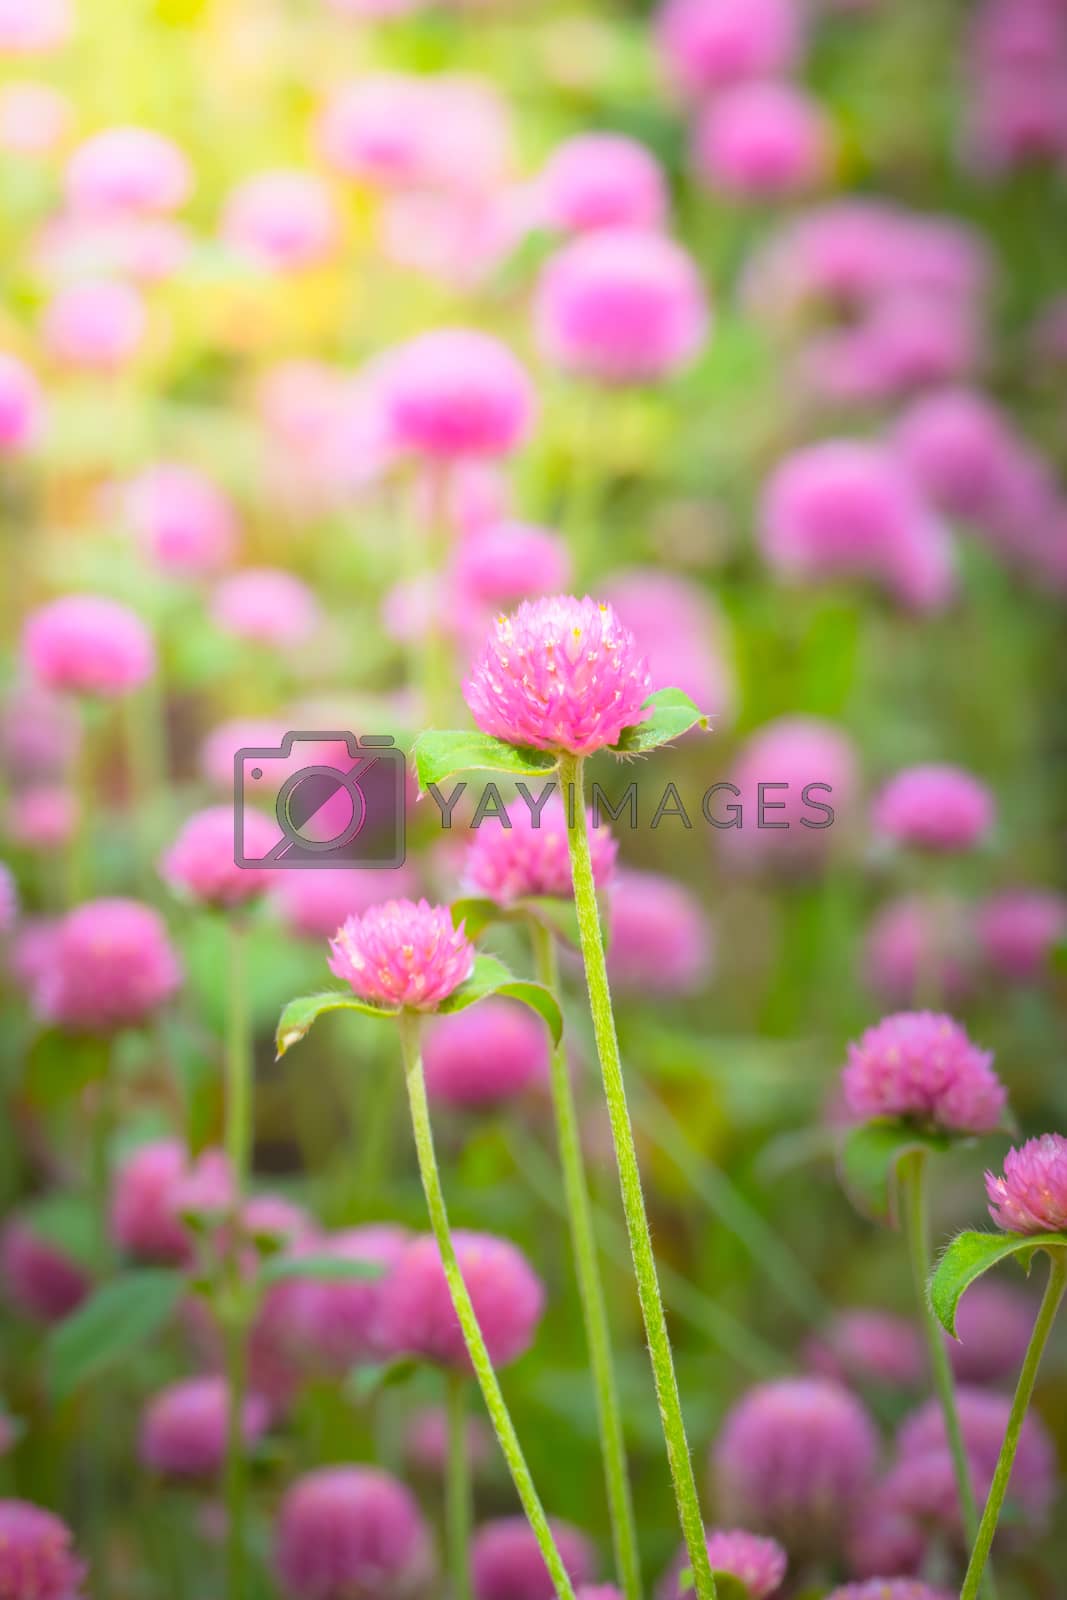 Royalty free image of The background image of the colorful flowers by teerawit